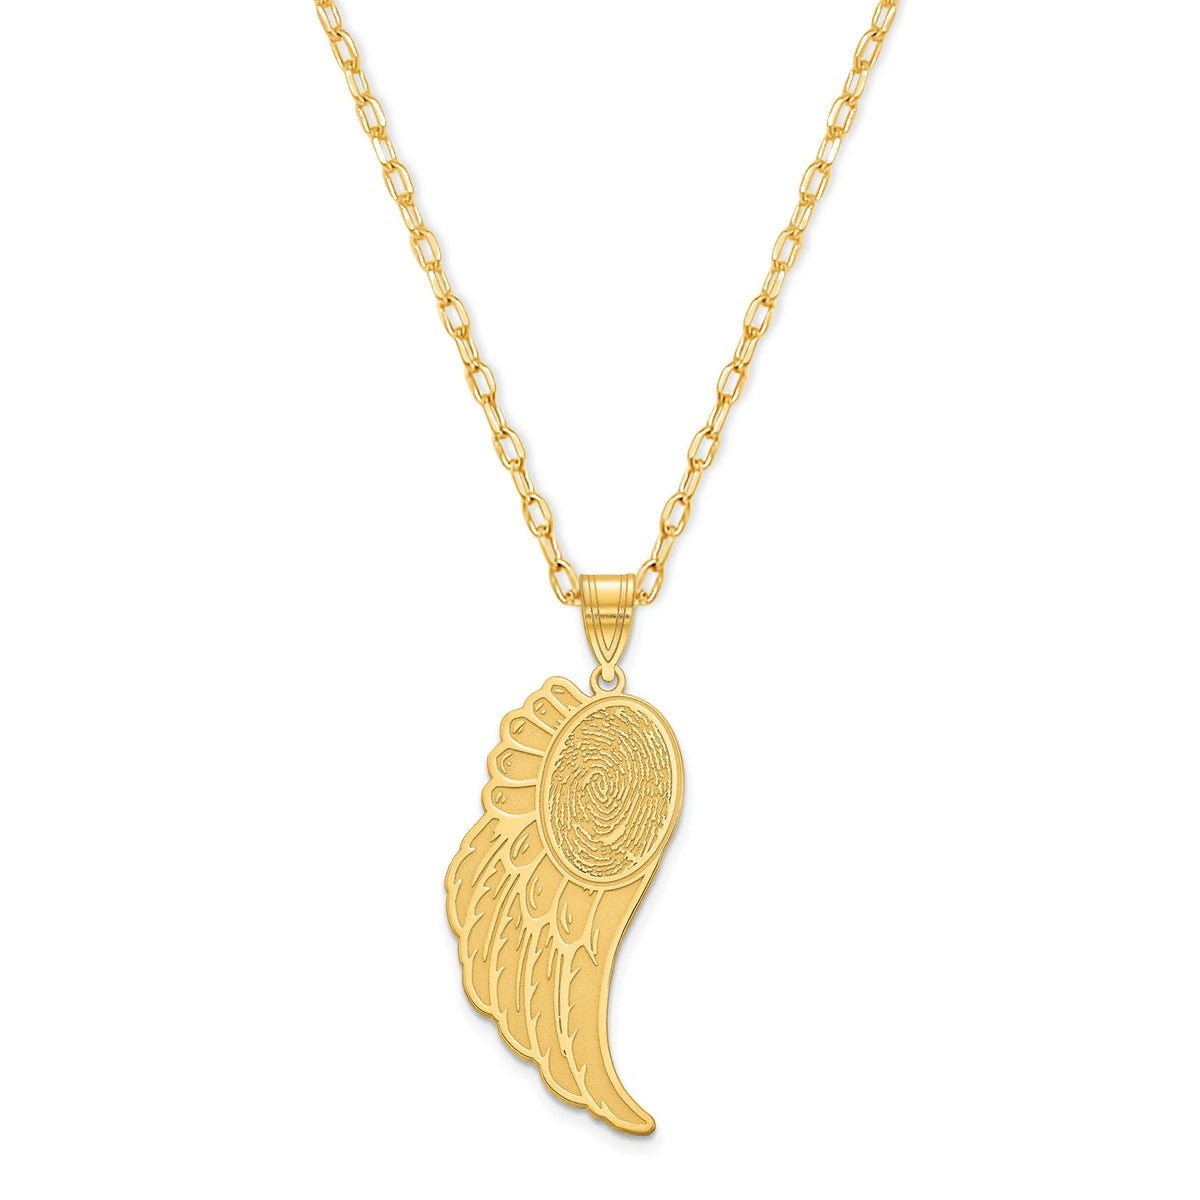 Personalized Angel Wing Fingerprint Pendant with Necklace - Gift Box Included - Made in USA